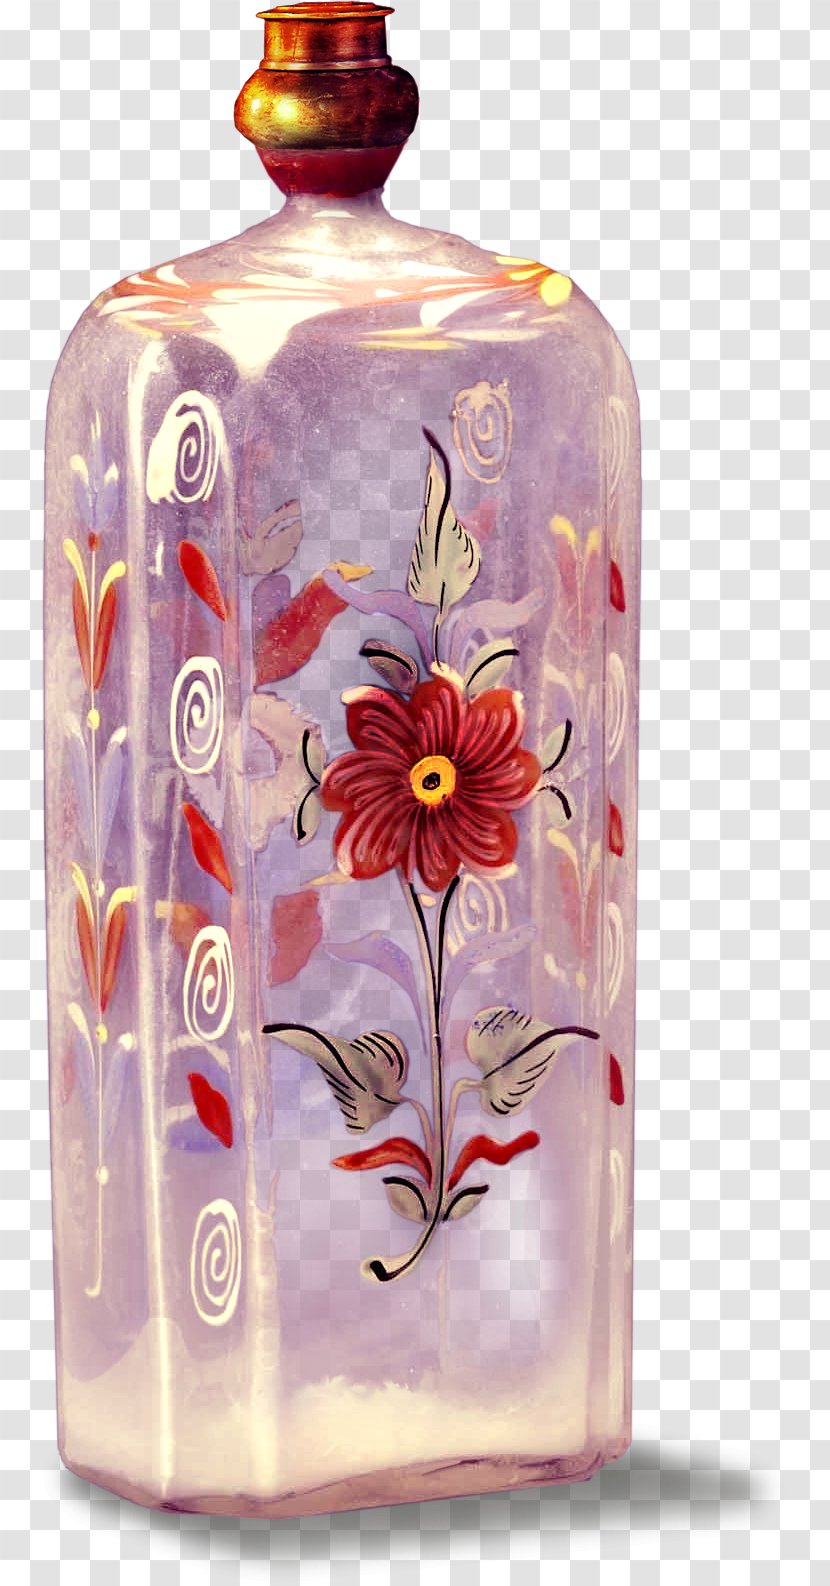 Glass Bottle Transparency And Translucency - Flower - Exquisite Pattern Transparent PNG